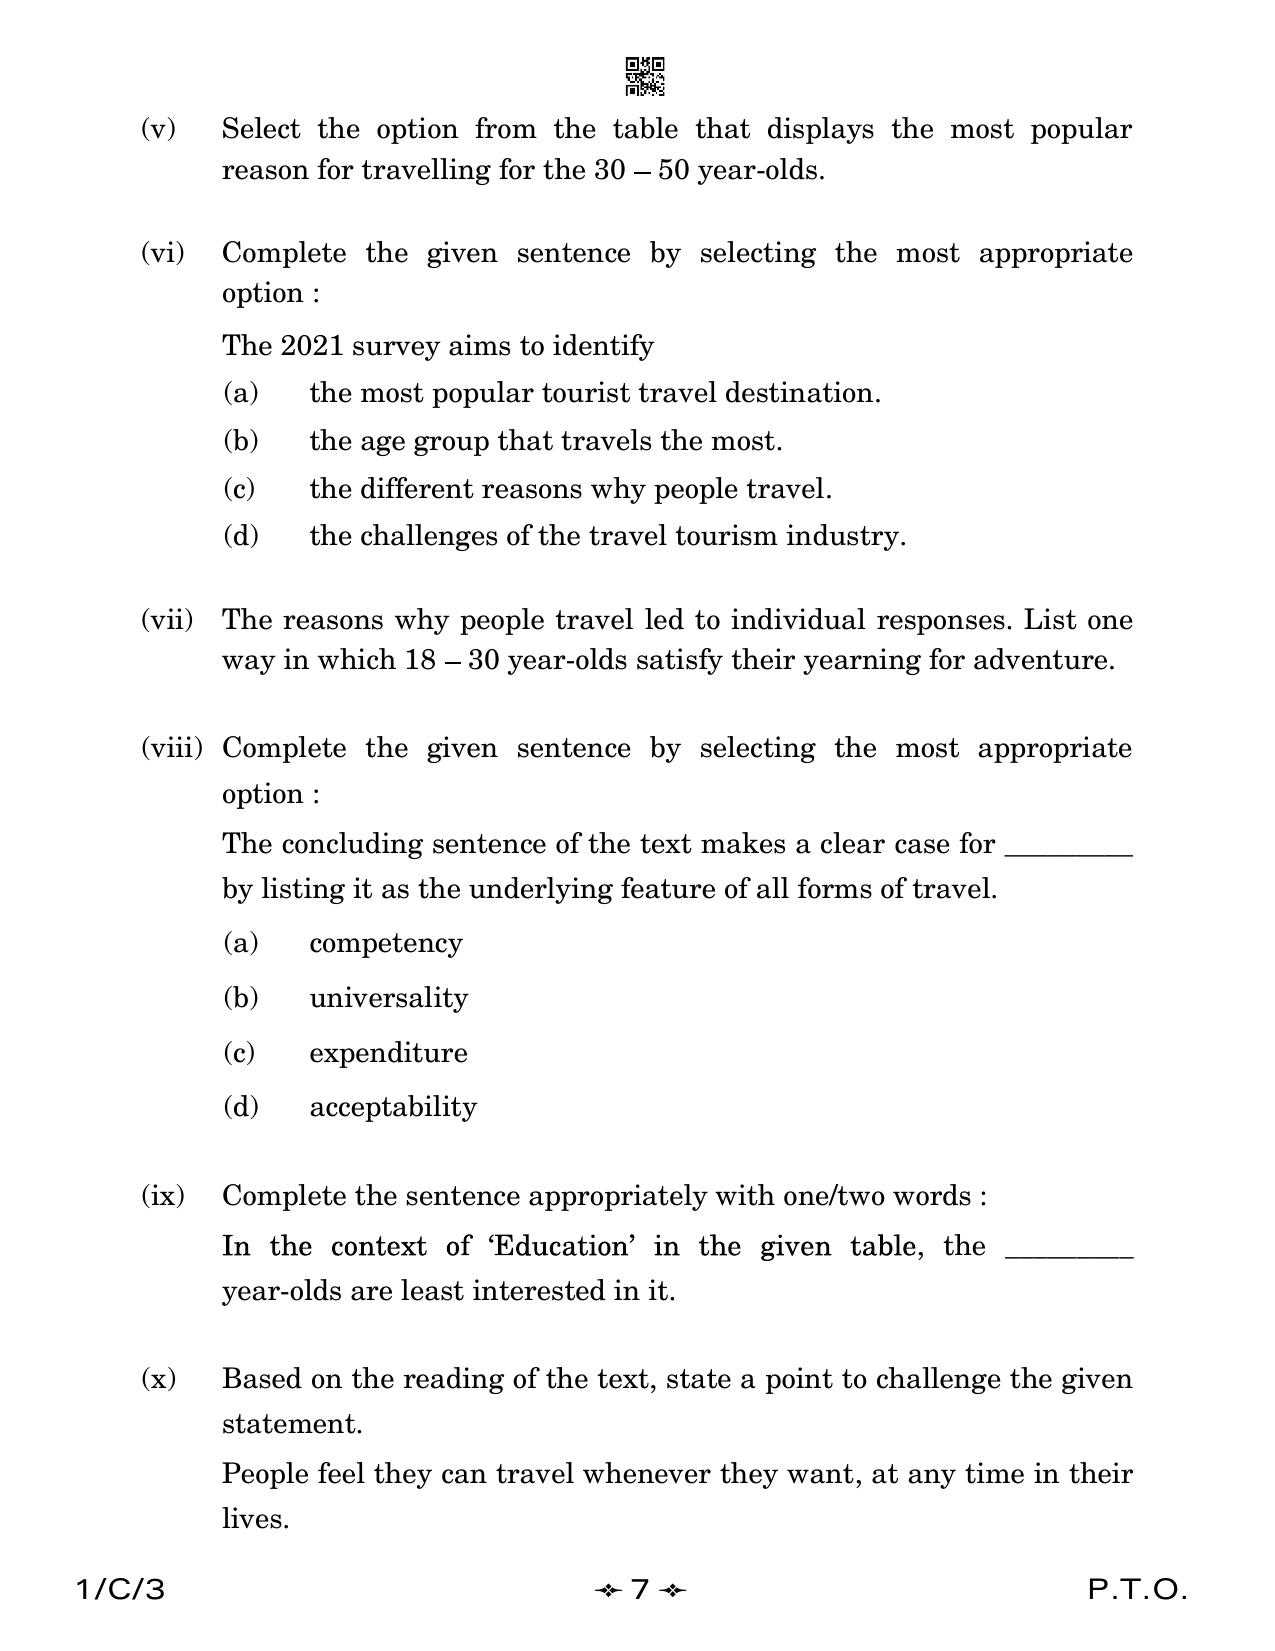 CBSE Class 12 1-3 English Core 2023 (Compartment) Question Paper - Page 7